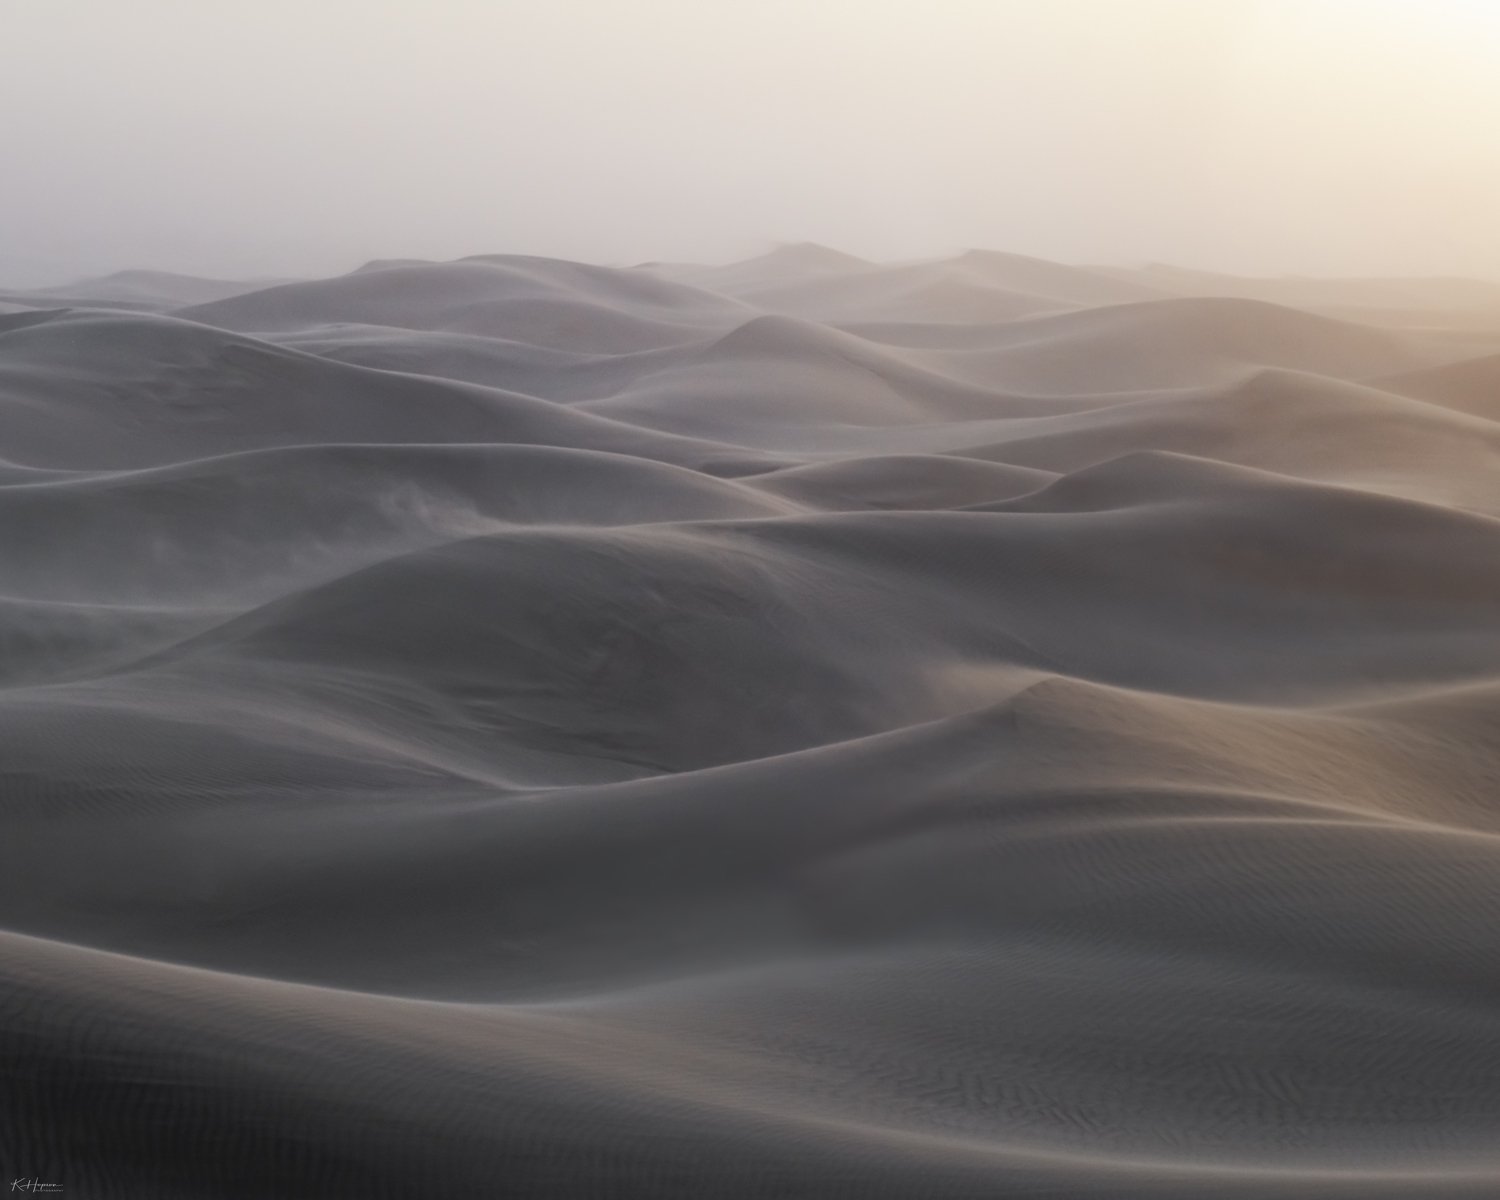 windblown sand and morning sunlight on sand dunes in death valley, california